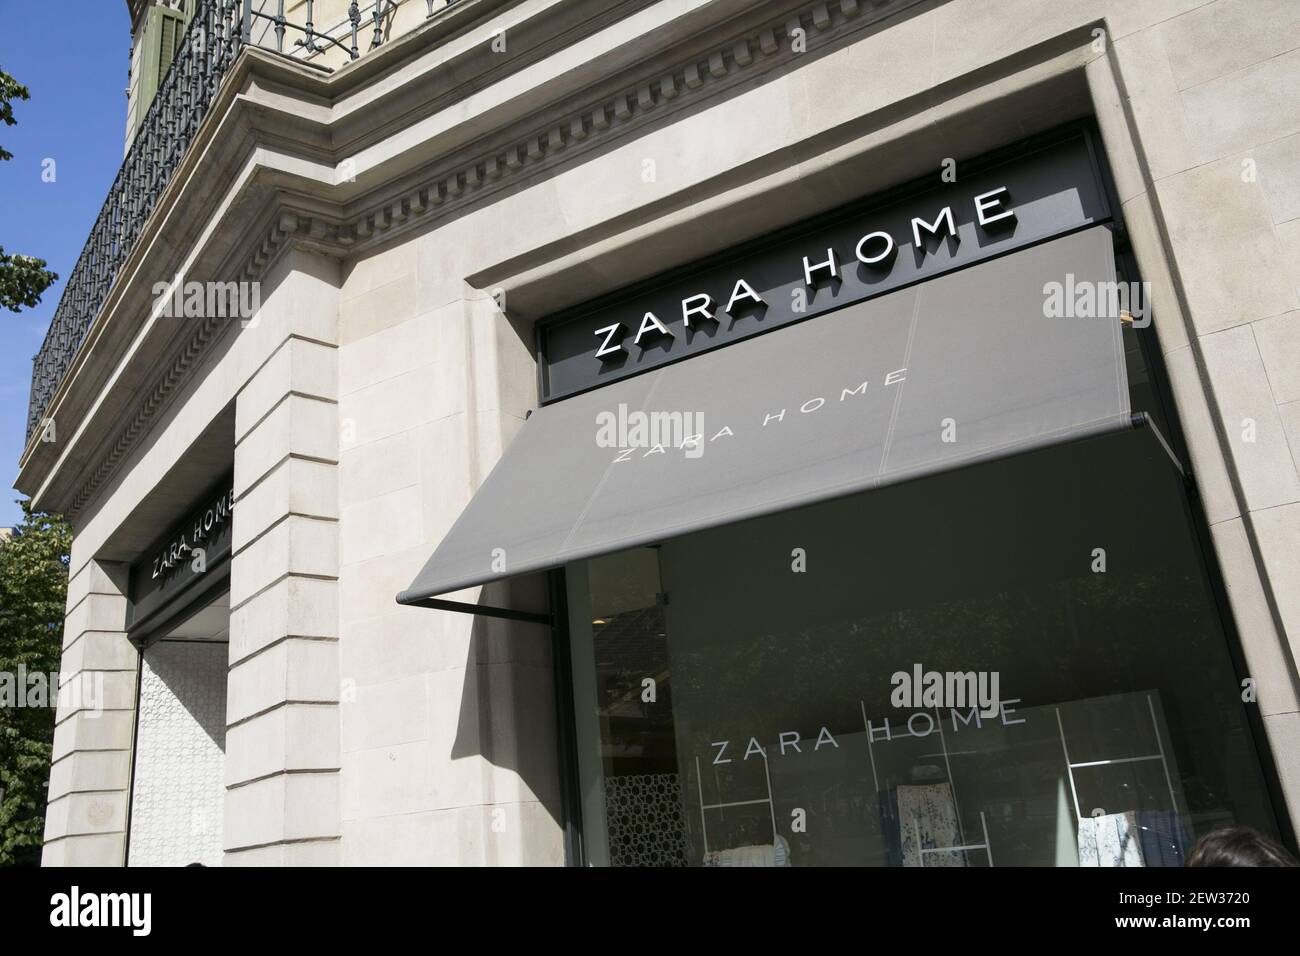 A logo sign outside of a Zara Home retail store in Barcelona, Spain on  August 30, 2017. Photo by Kristoffer Tripplaar Stock Photo - Alamy